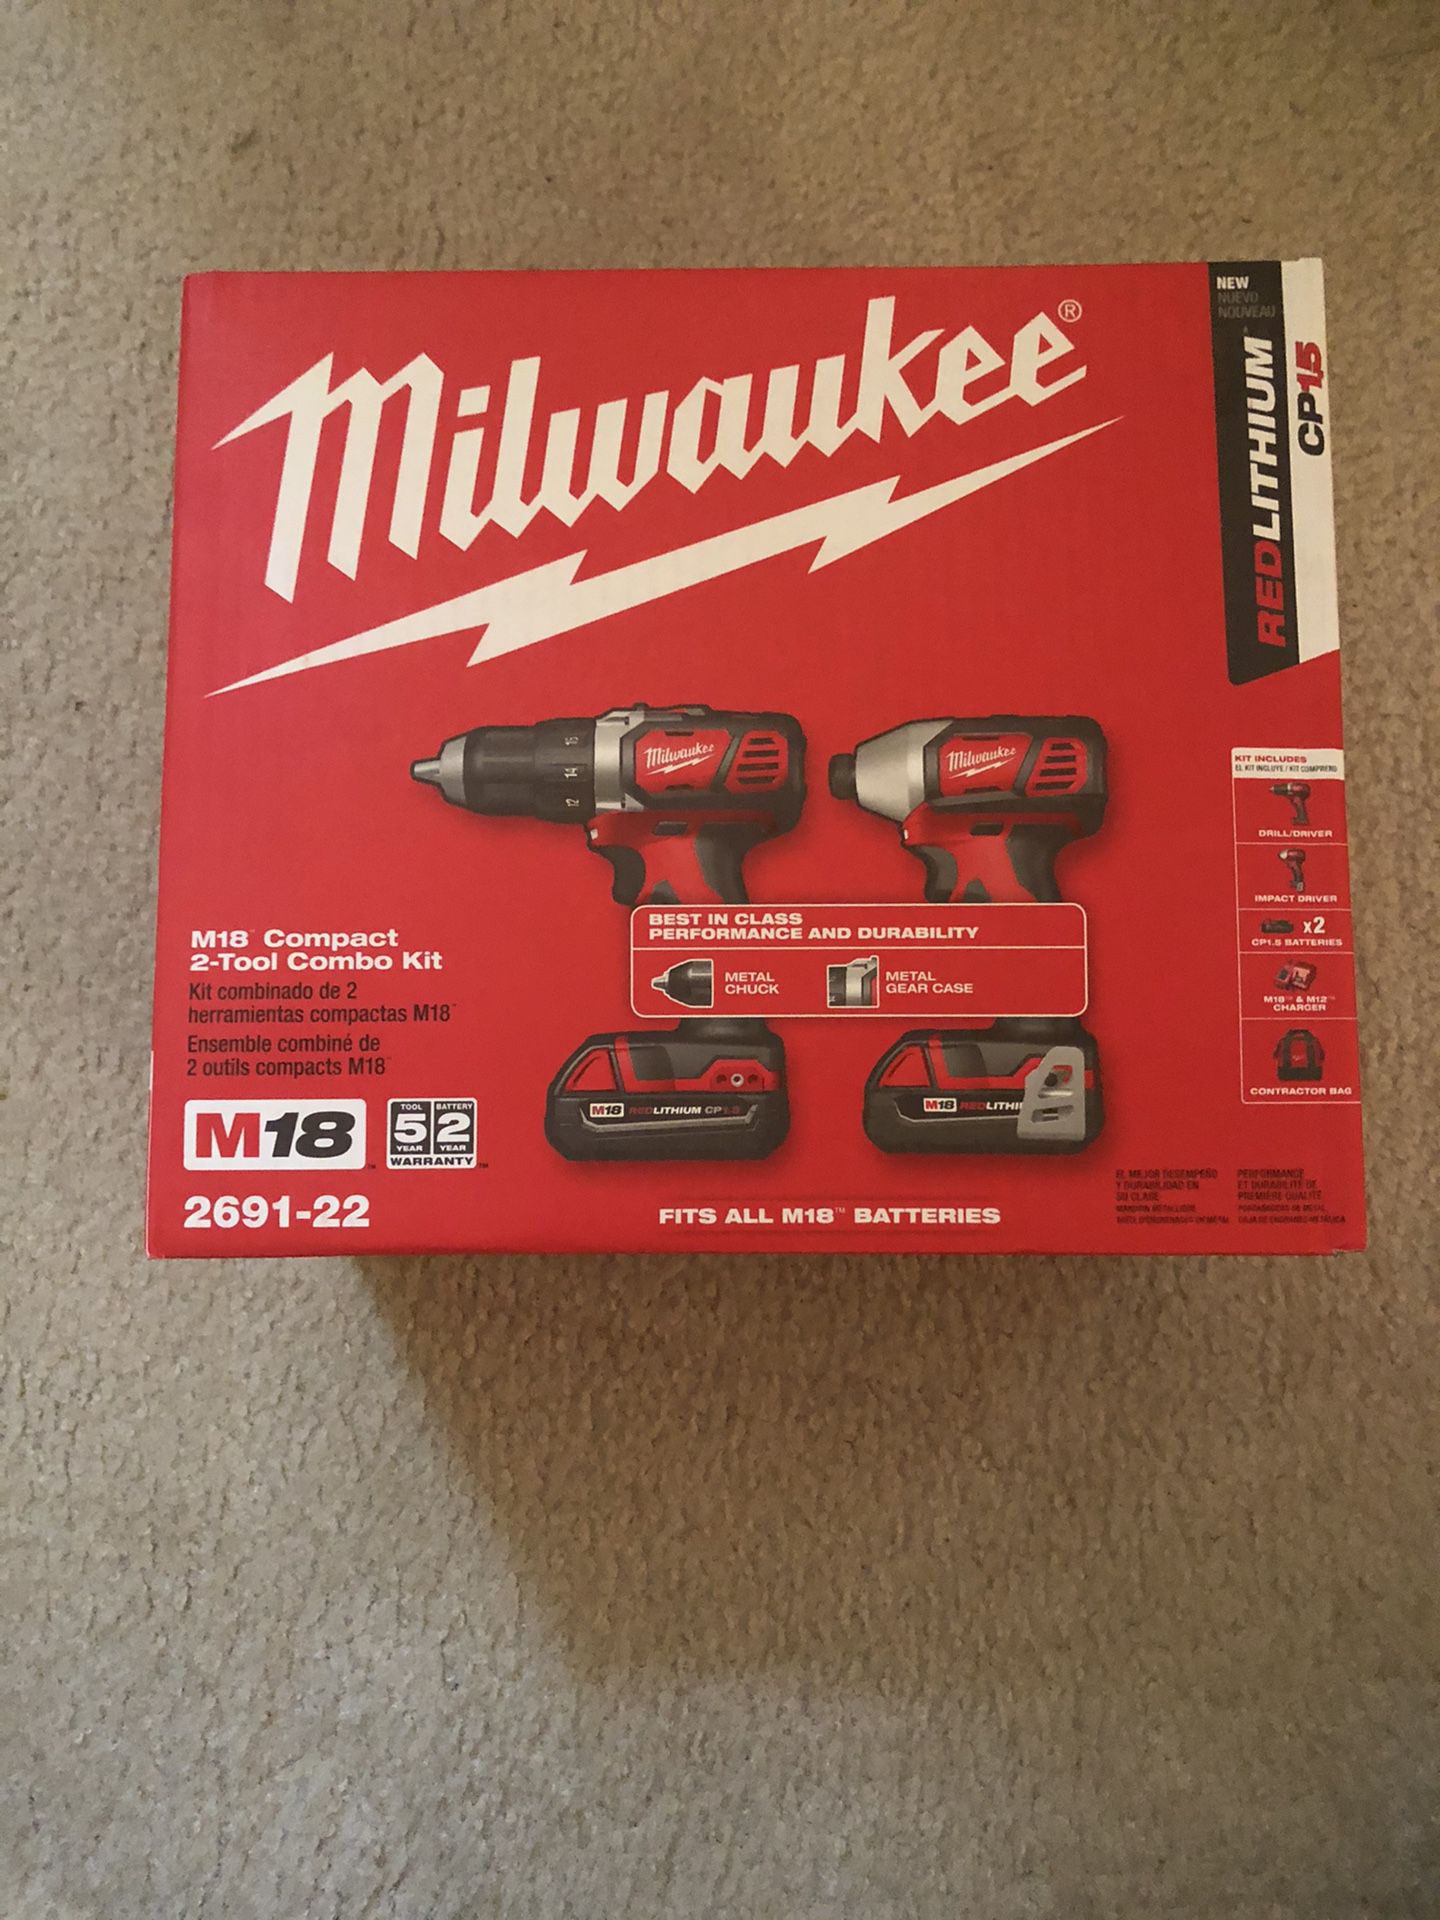 Brand new- never used drill set